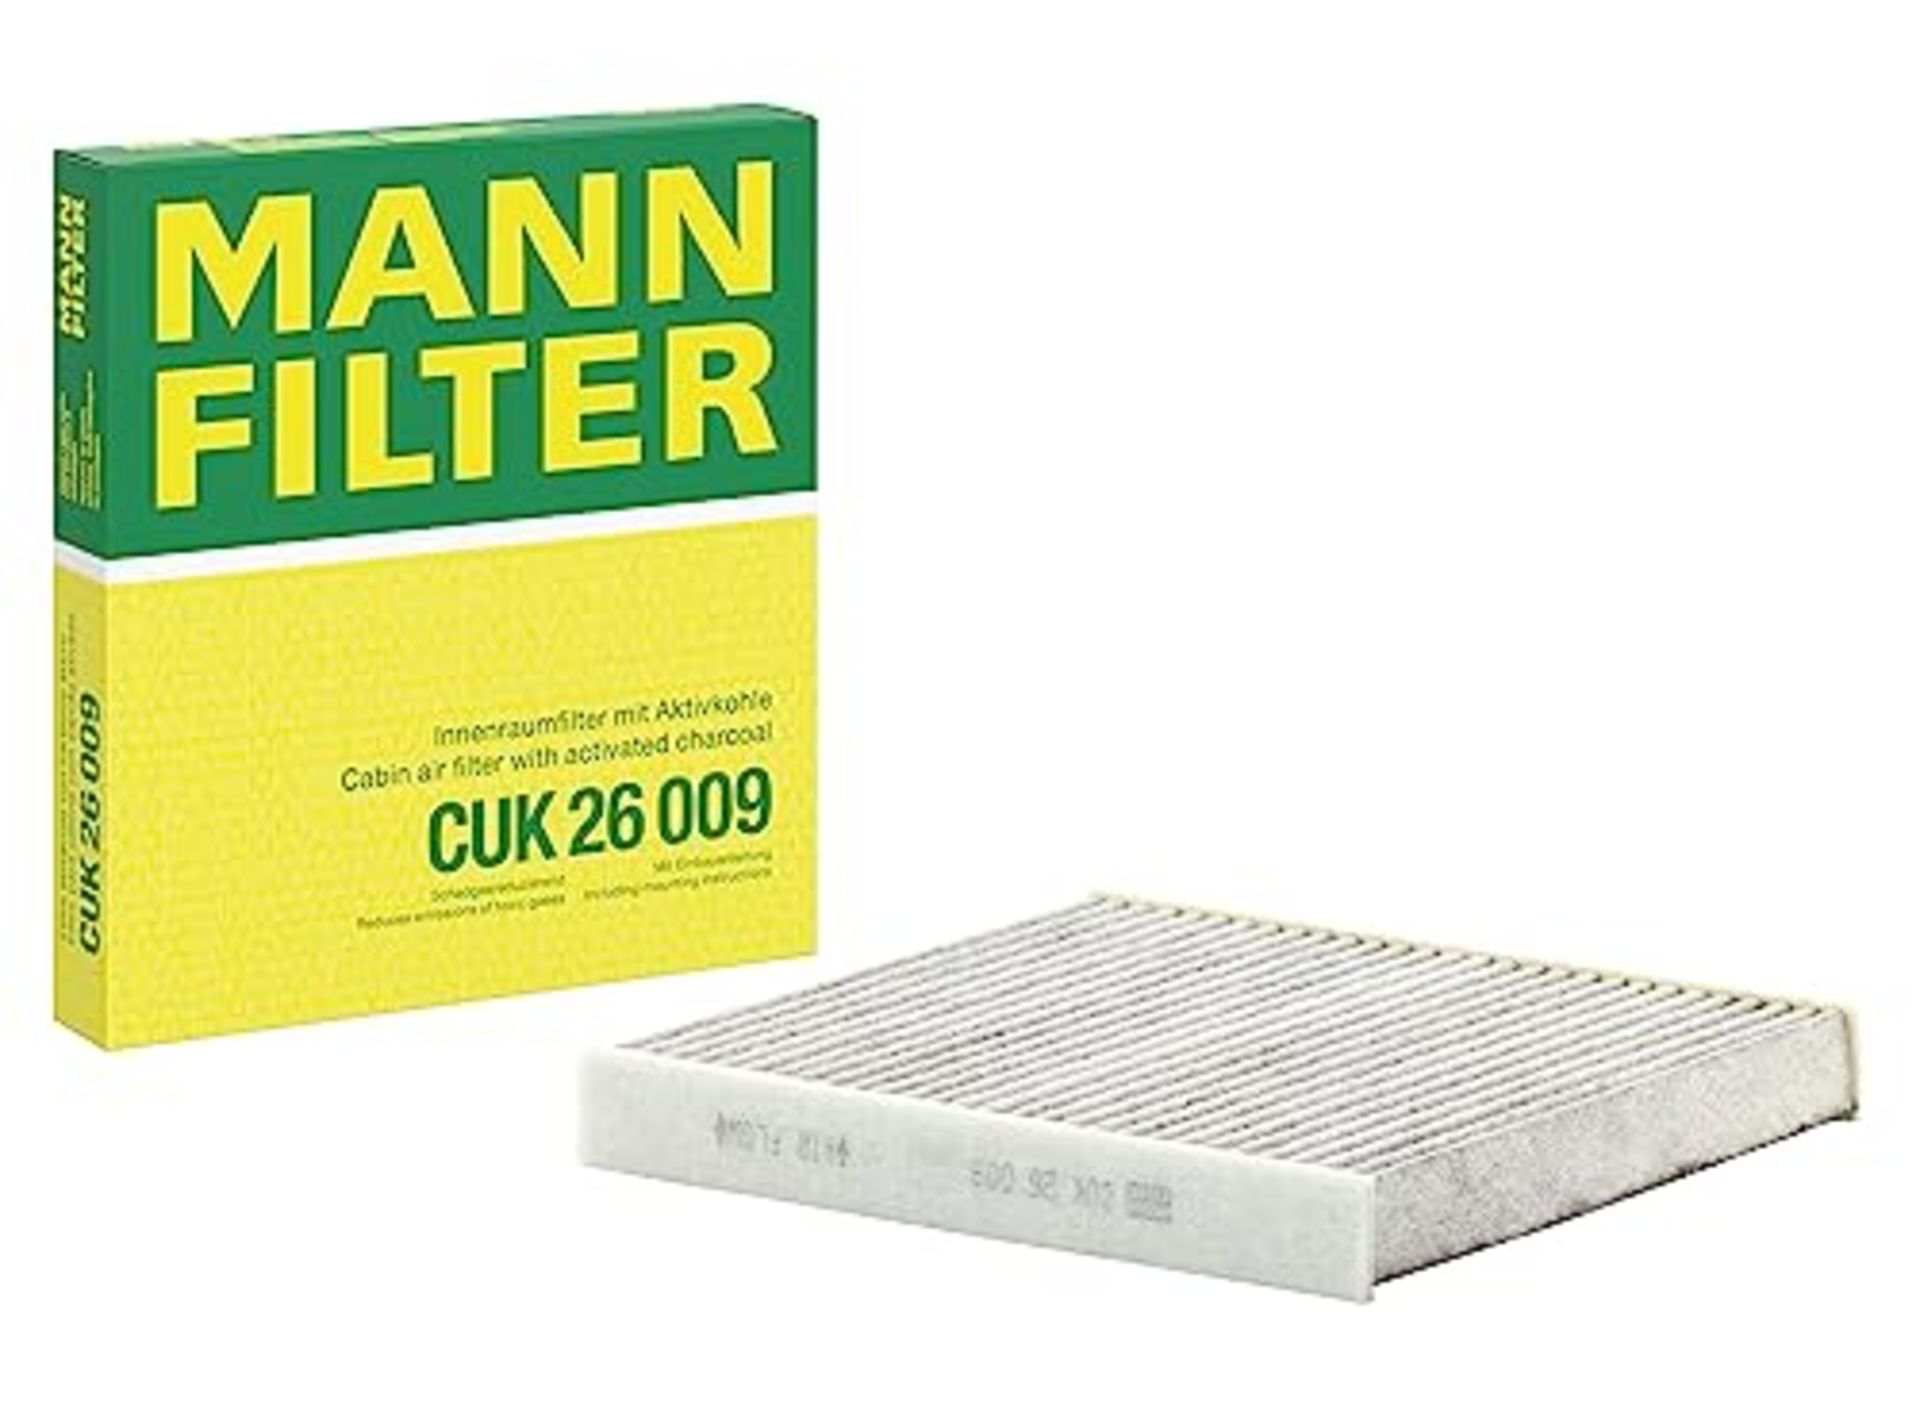 MANN-FILTER CUK 26 009 Cabin Air Filter - Pollen Filter with Activated Carbon - For Ca - Image 4 of 6